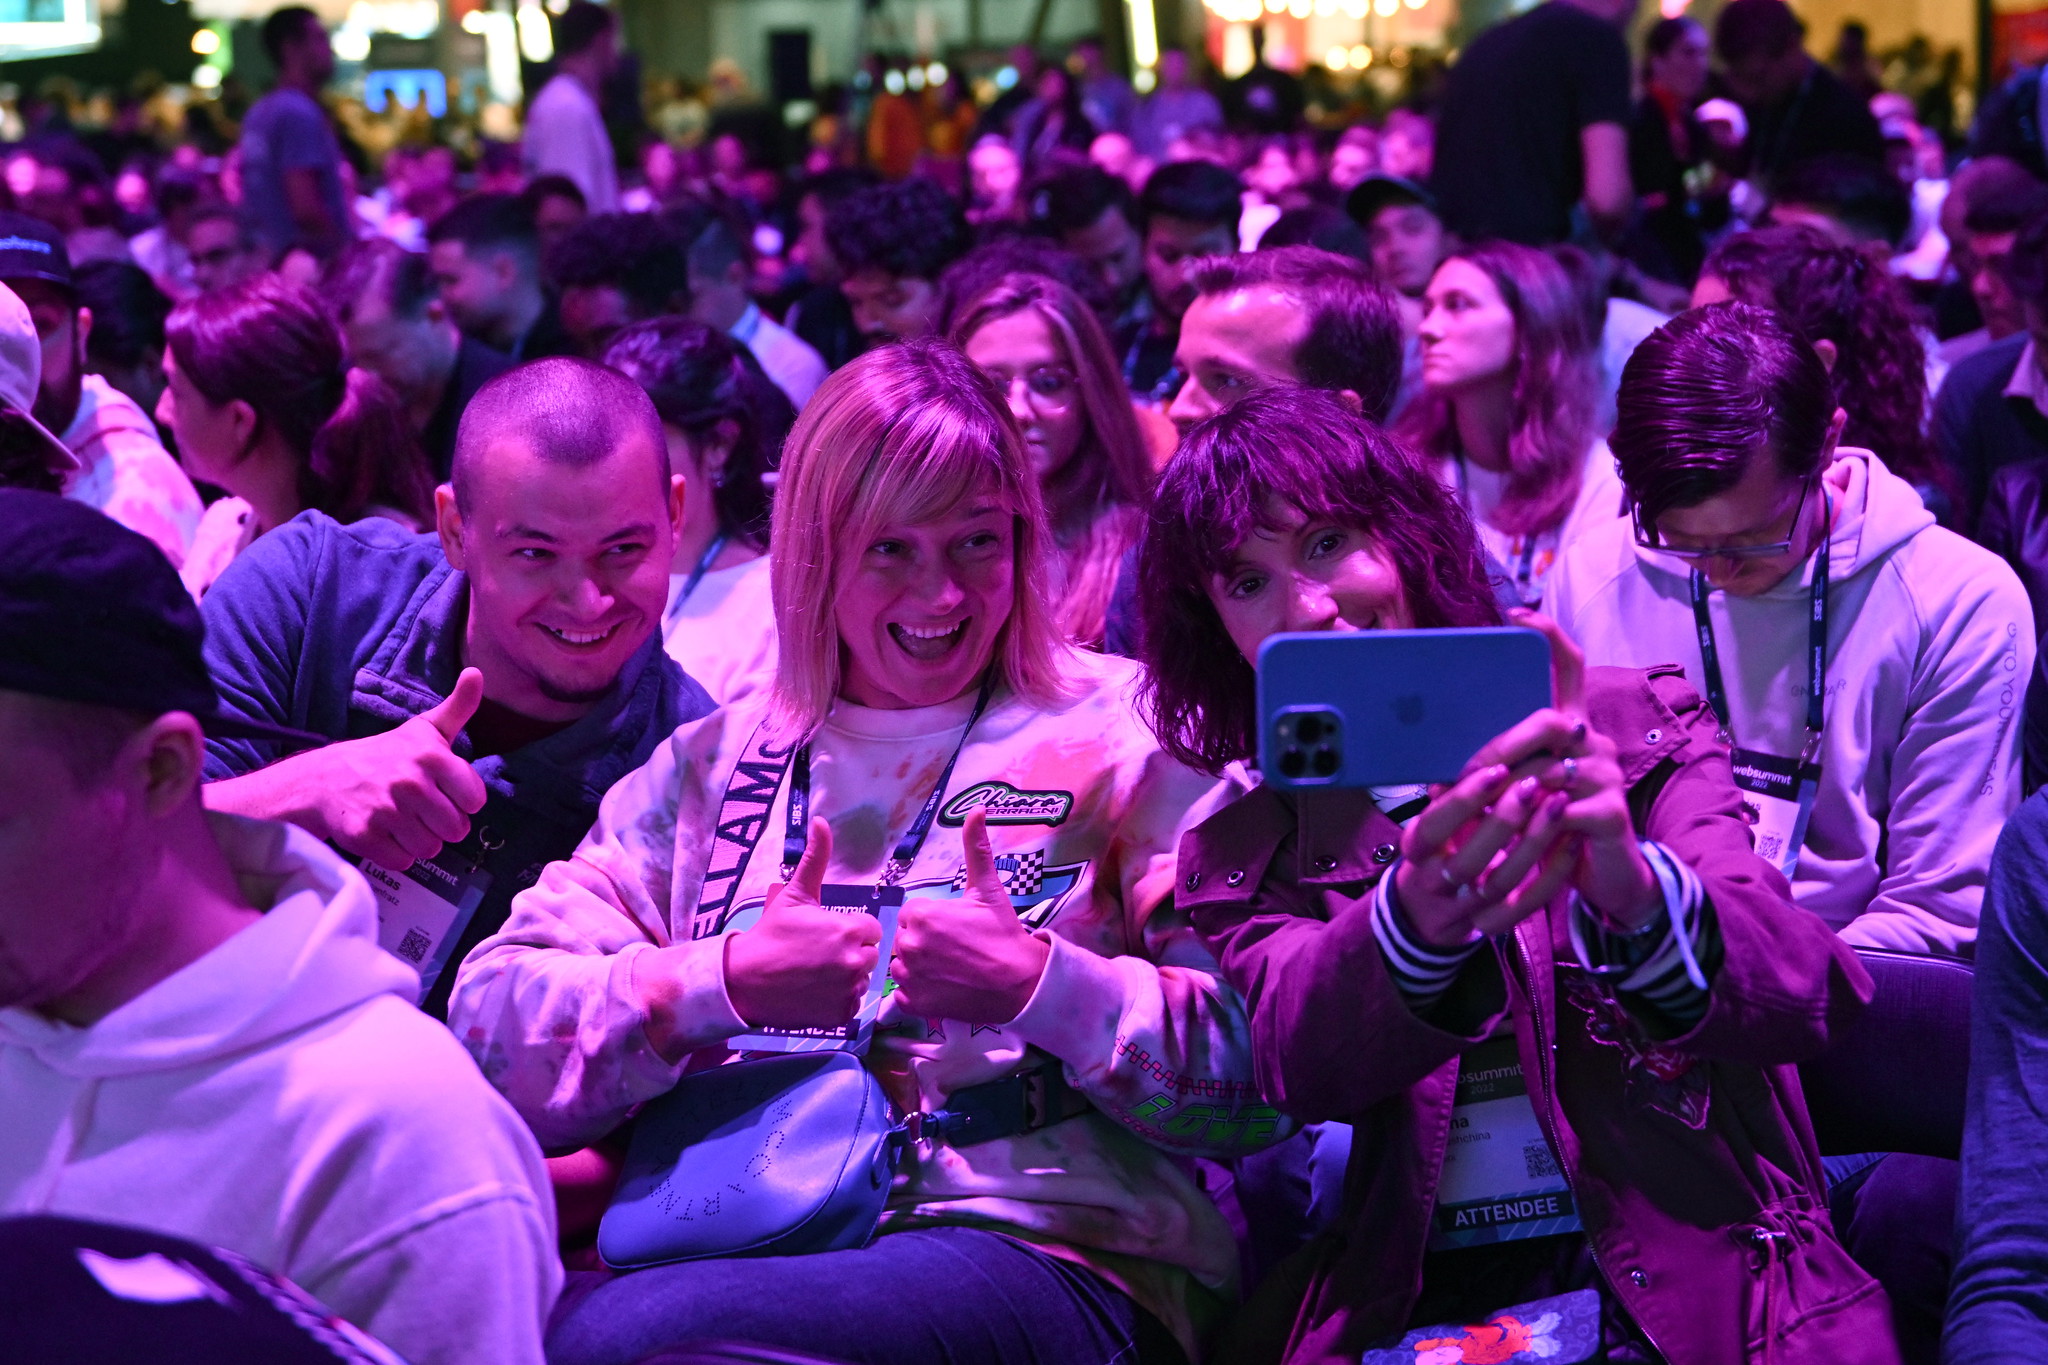 Three smiling people pose for a selfie. They are sitting in a crowded audience.